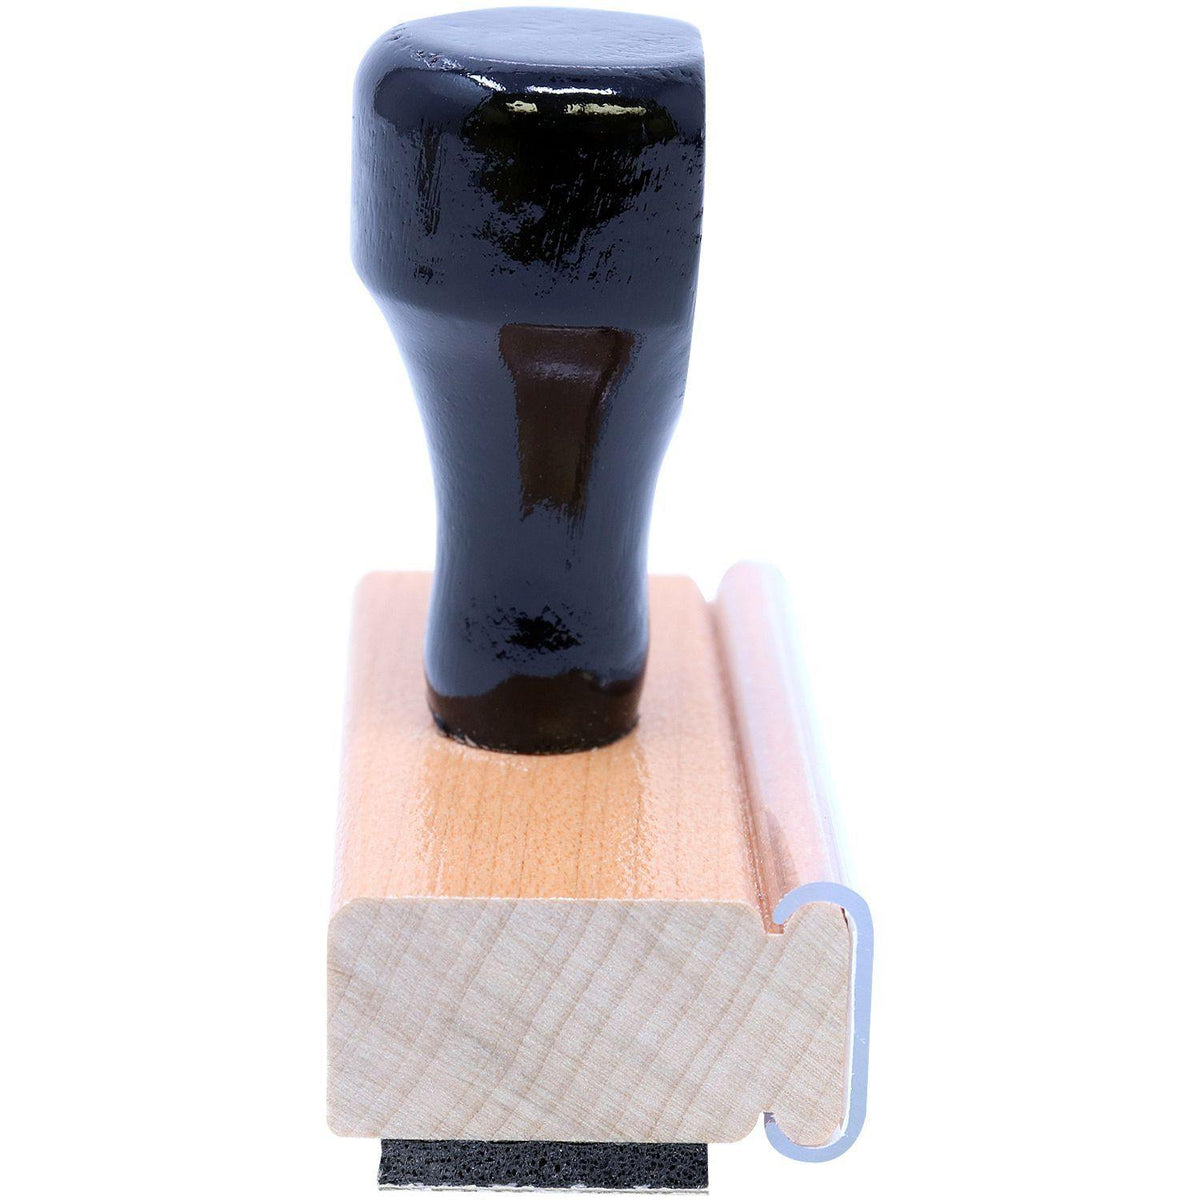 Printed Matter Rubber Stamp - Engineer Seal Stamps - Brand_Acorn, Impression Size_Small, Stamp Type_Regular Stamp, Type of Use_General, Type of Use_Office